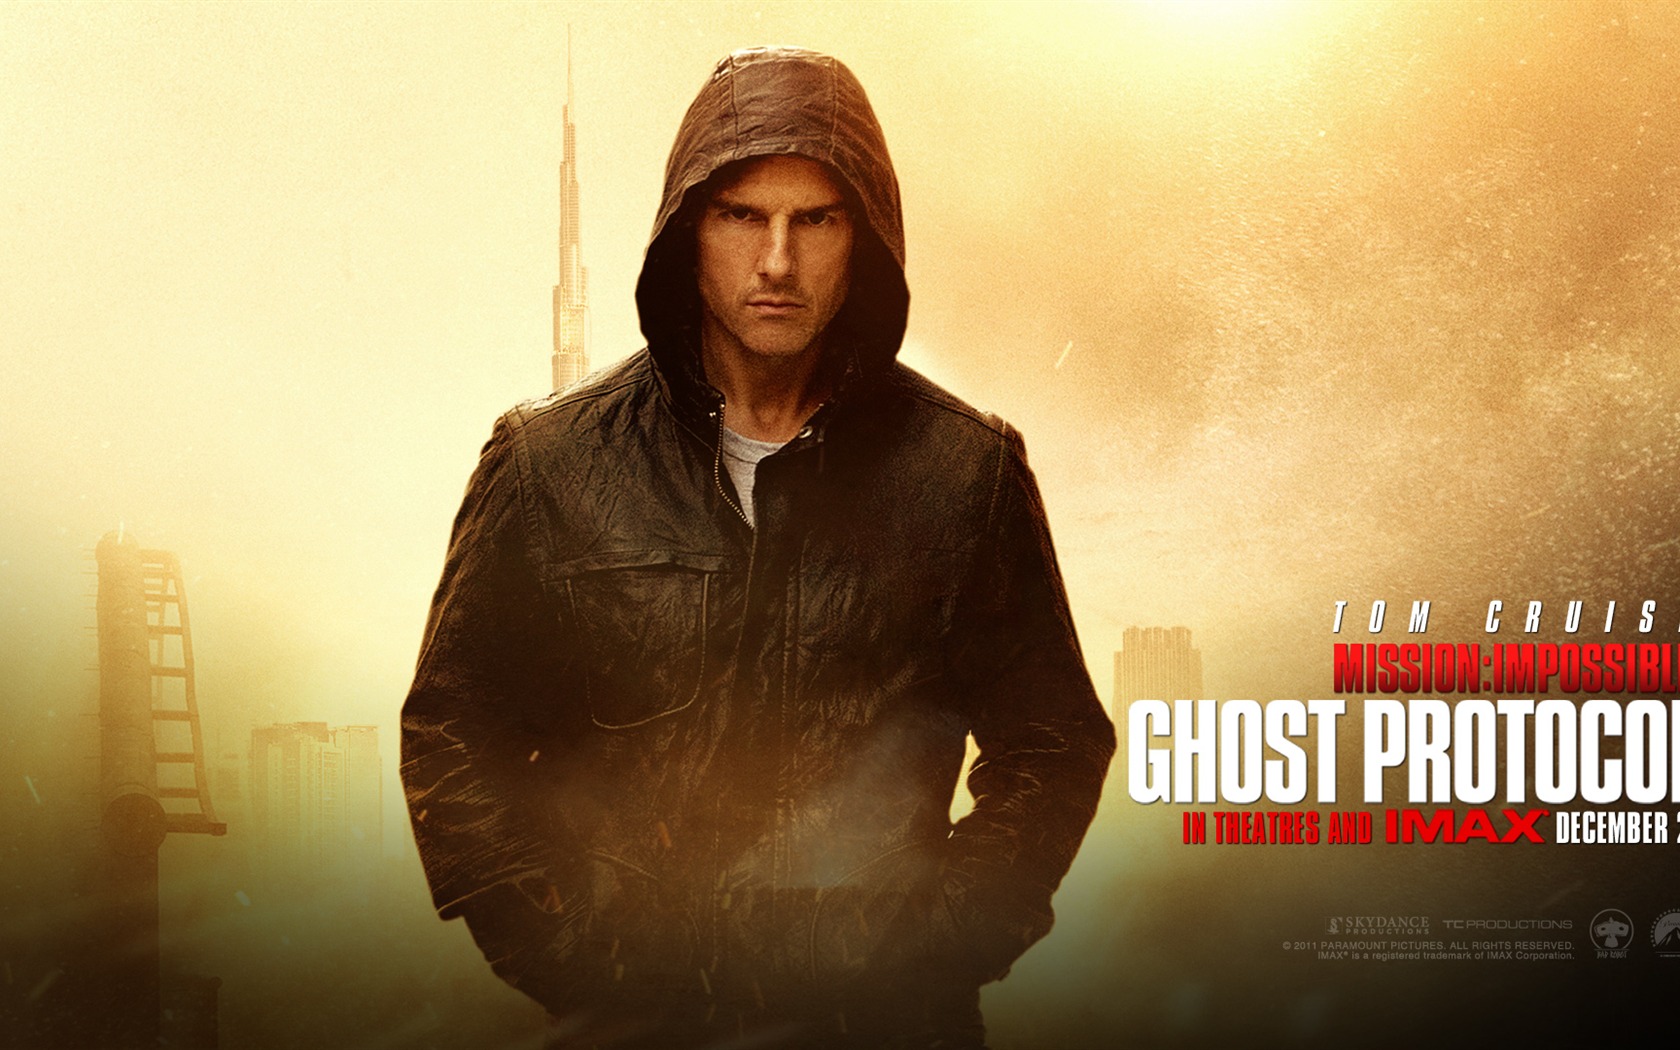 Mission: Impossible - Ghost Protocol 碟中谍4 高清壁纸9 - 1680x1050